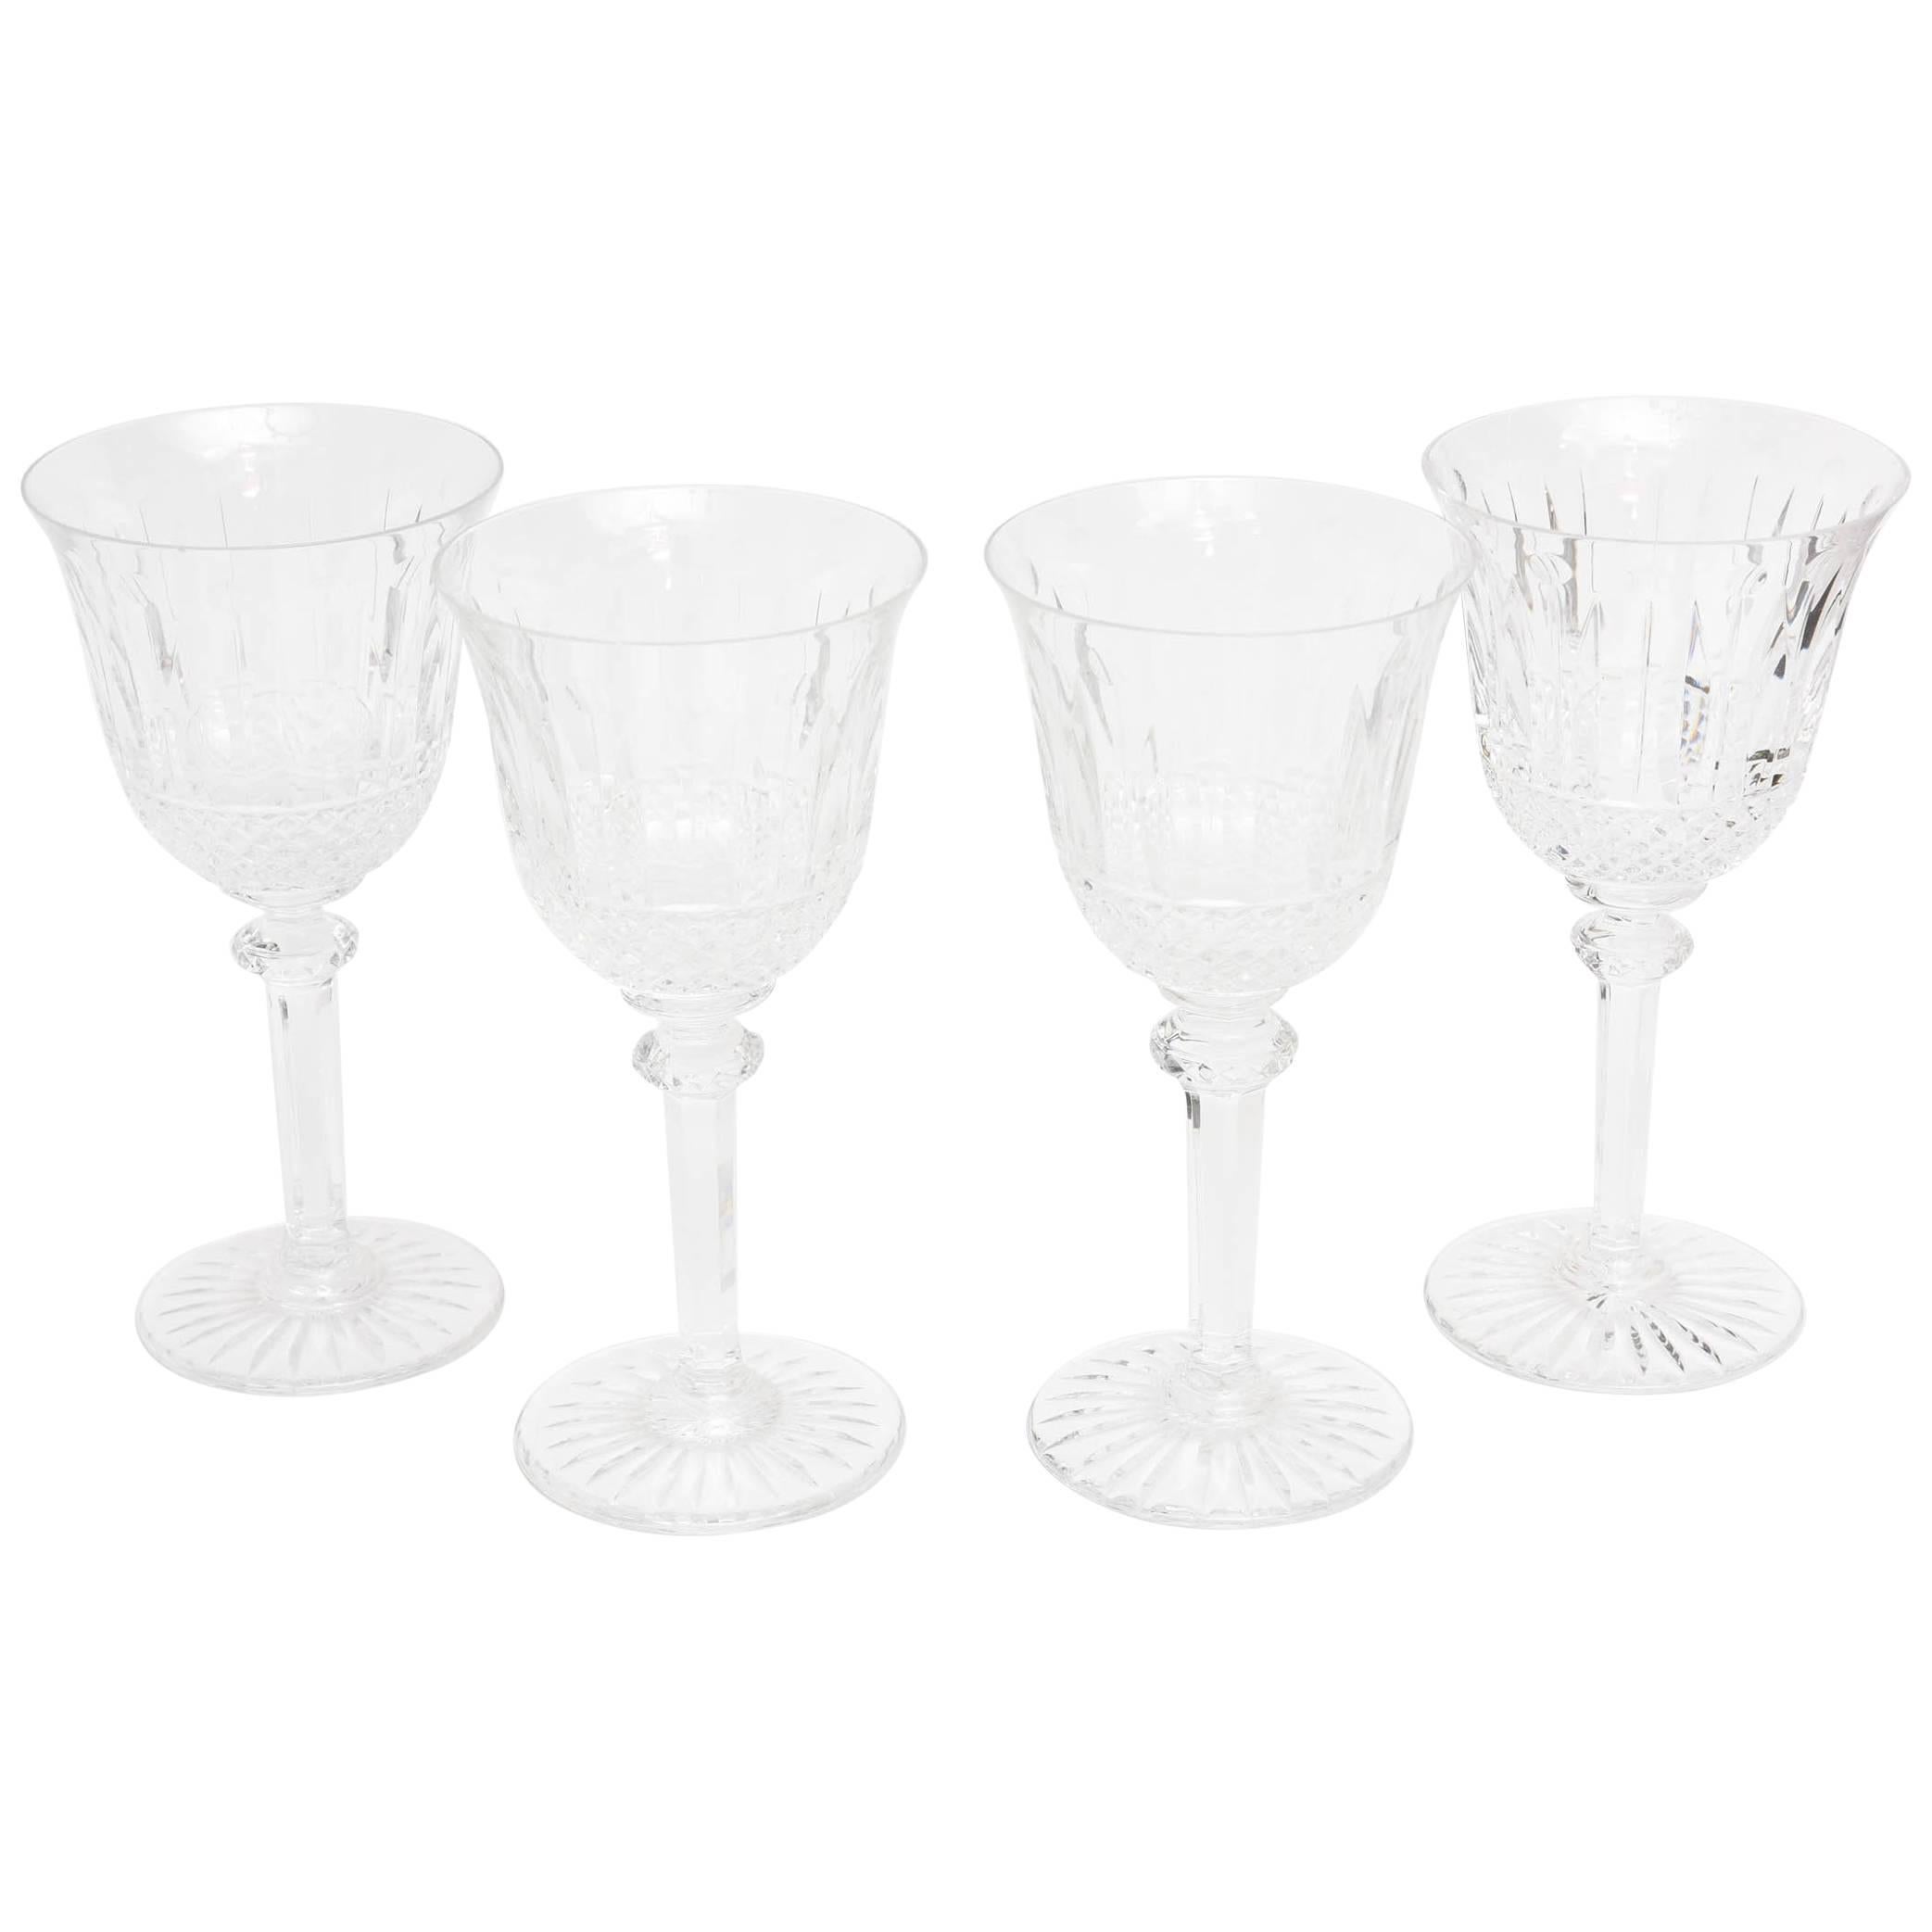 Four Saint Louis Crystal Water Goblets, "Tommy" Pattern